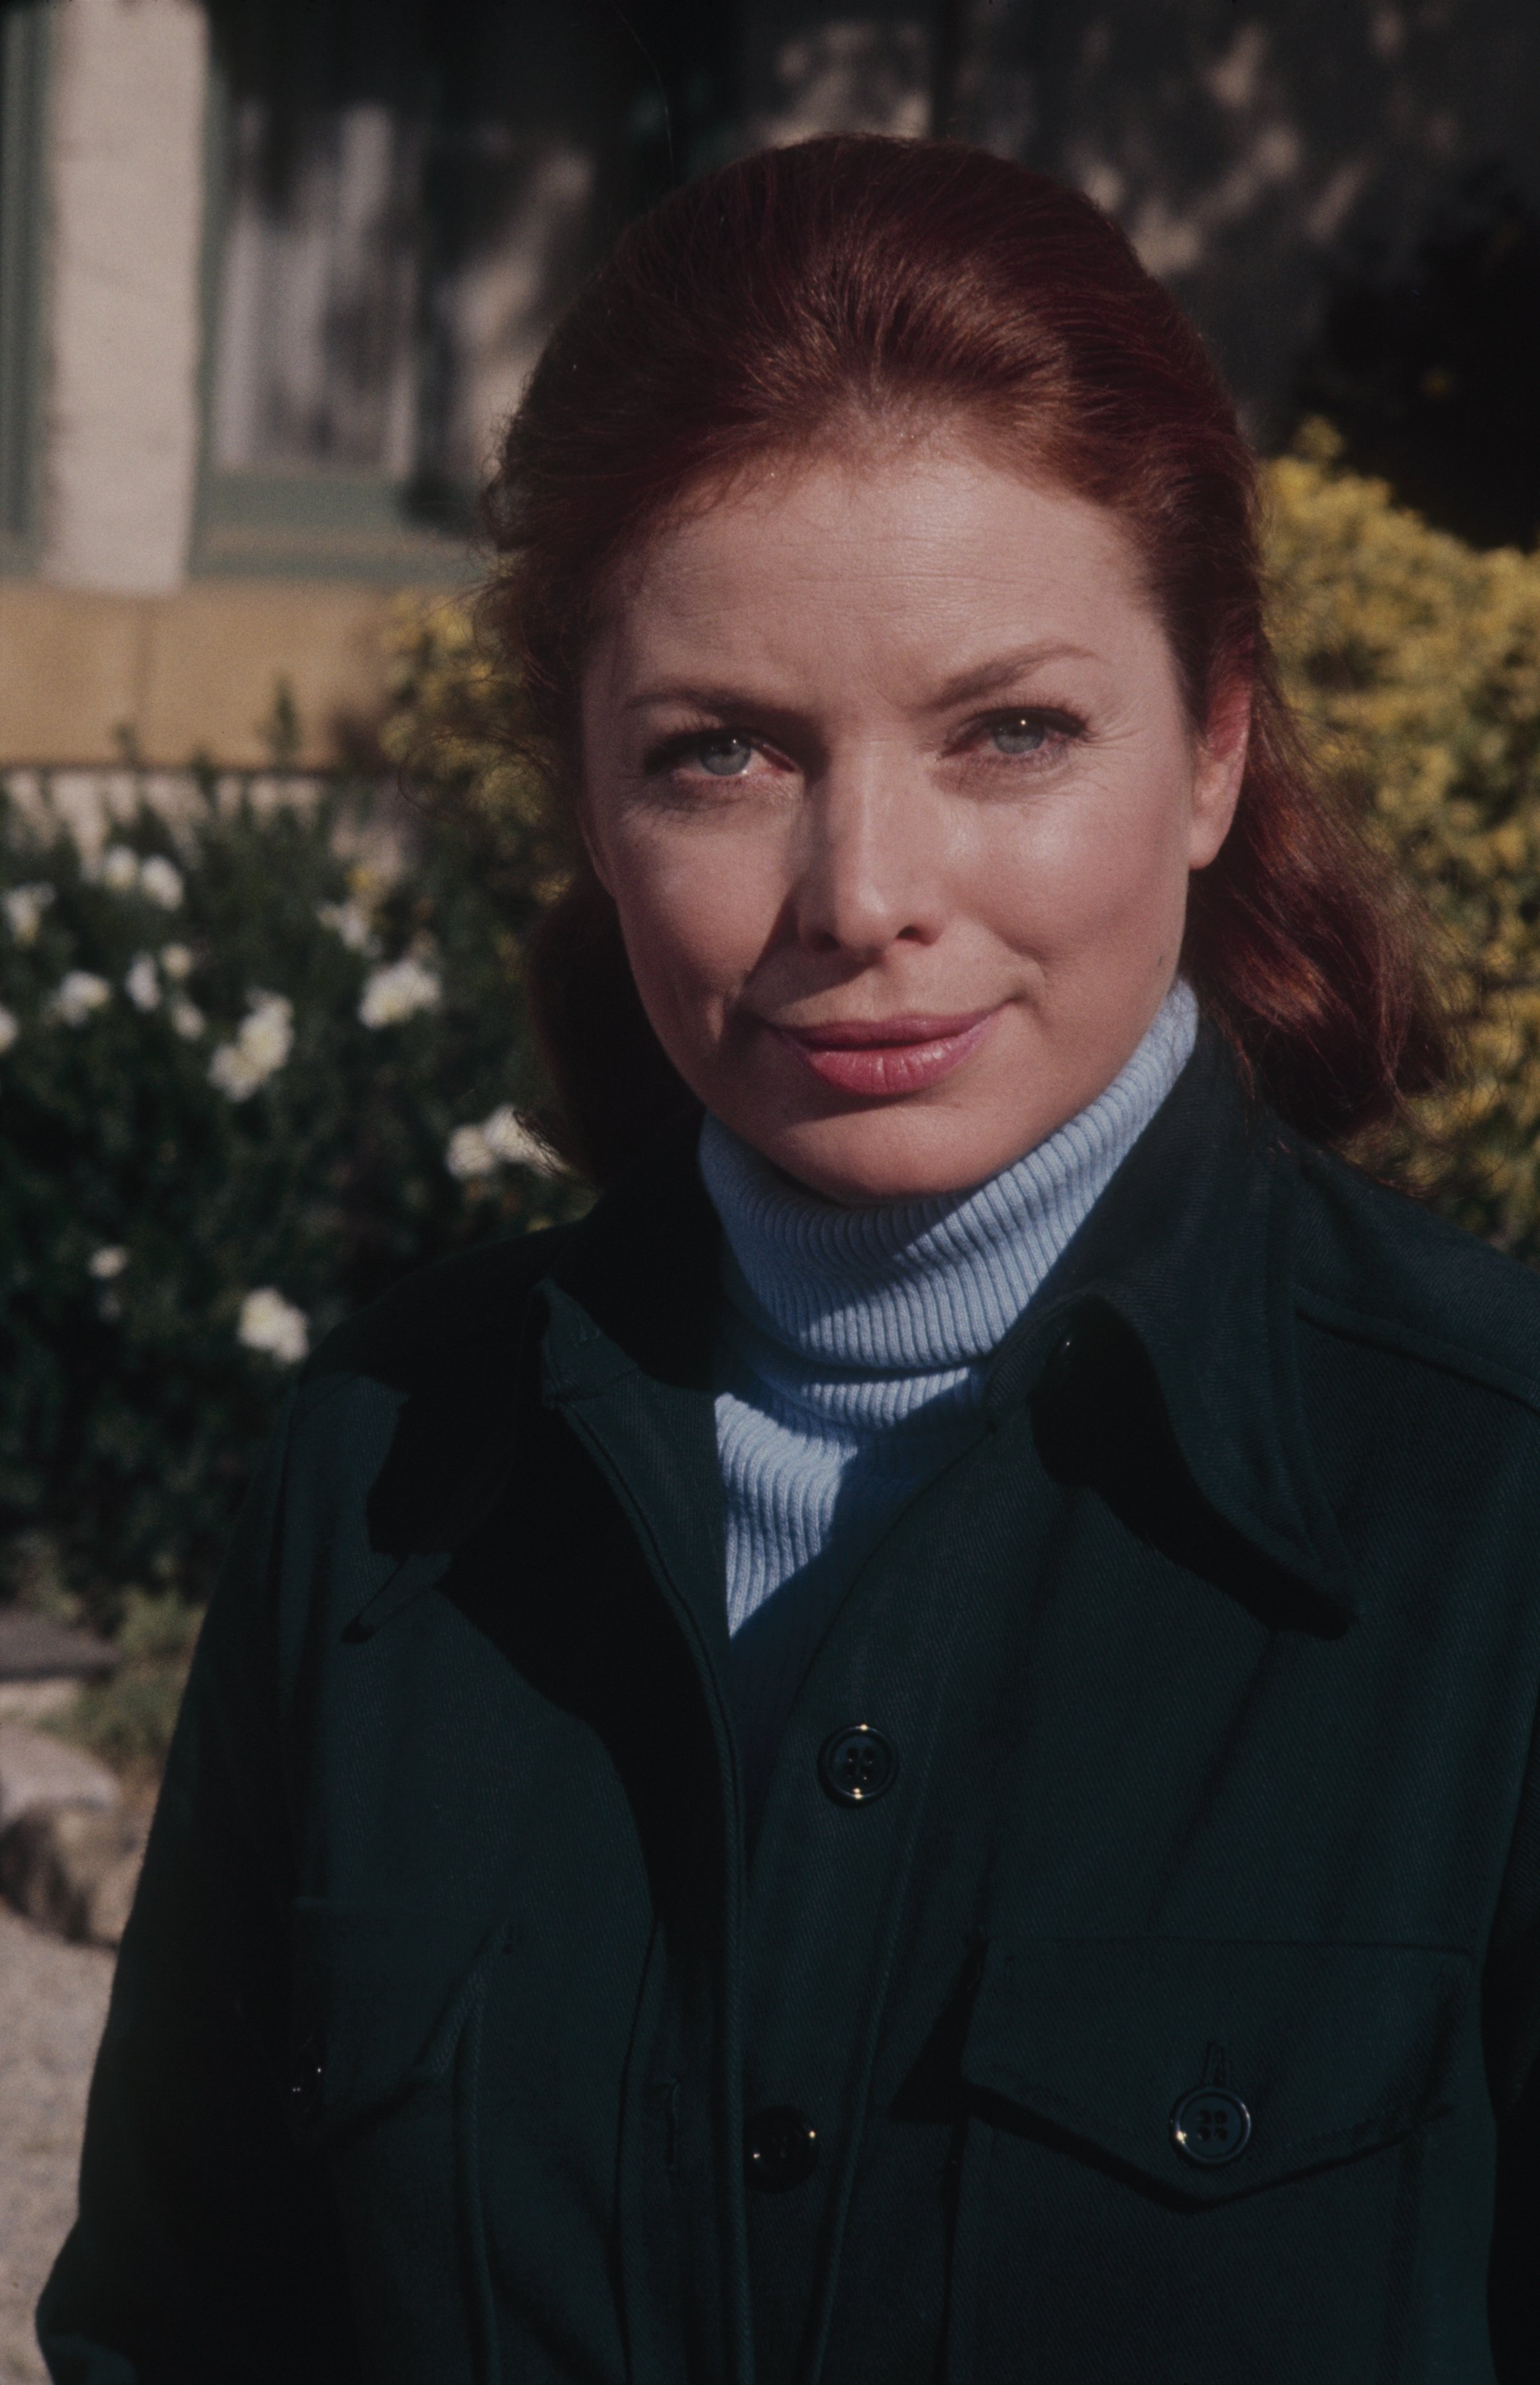 'The Andy Griffith Show' actor Aneta Corsaut, 1973